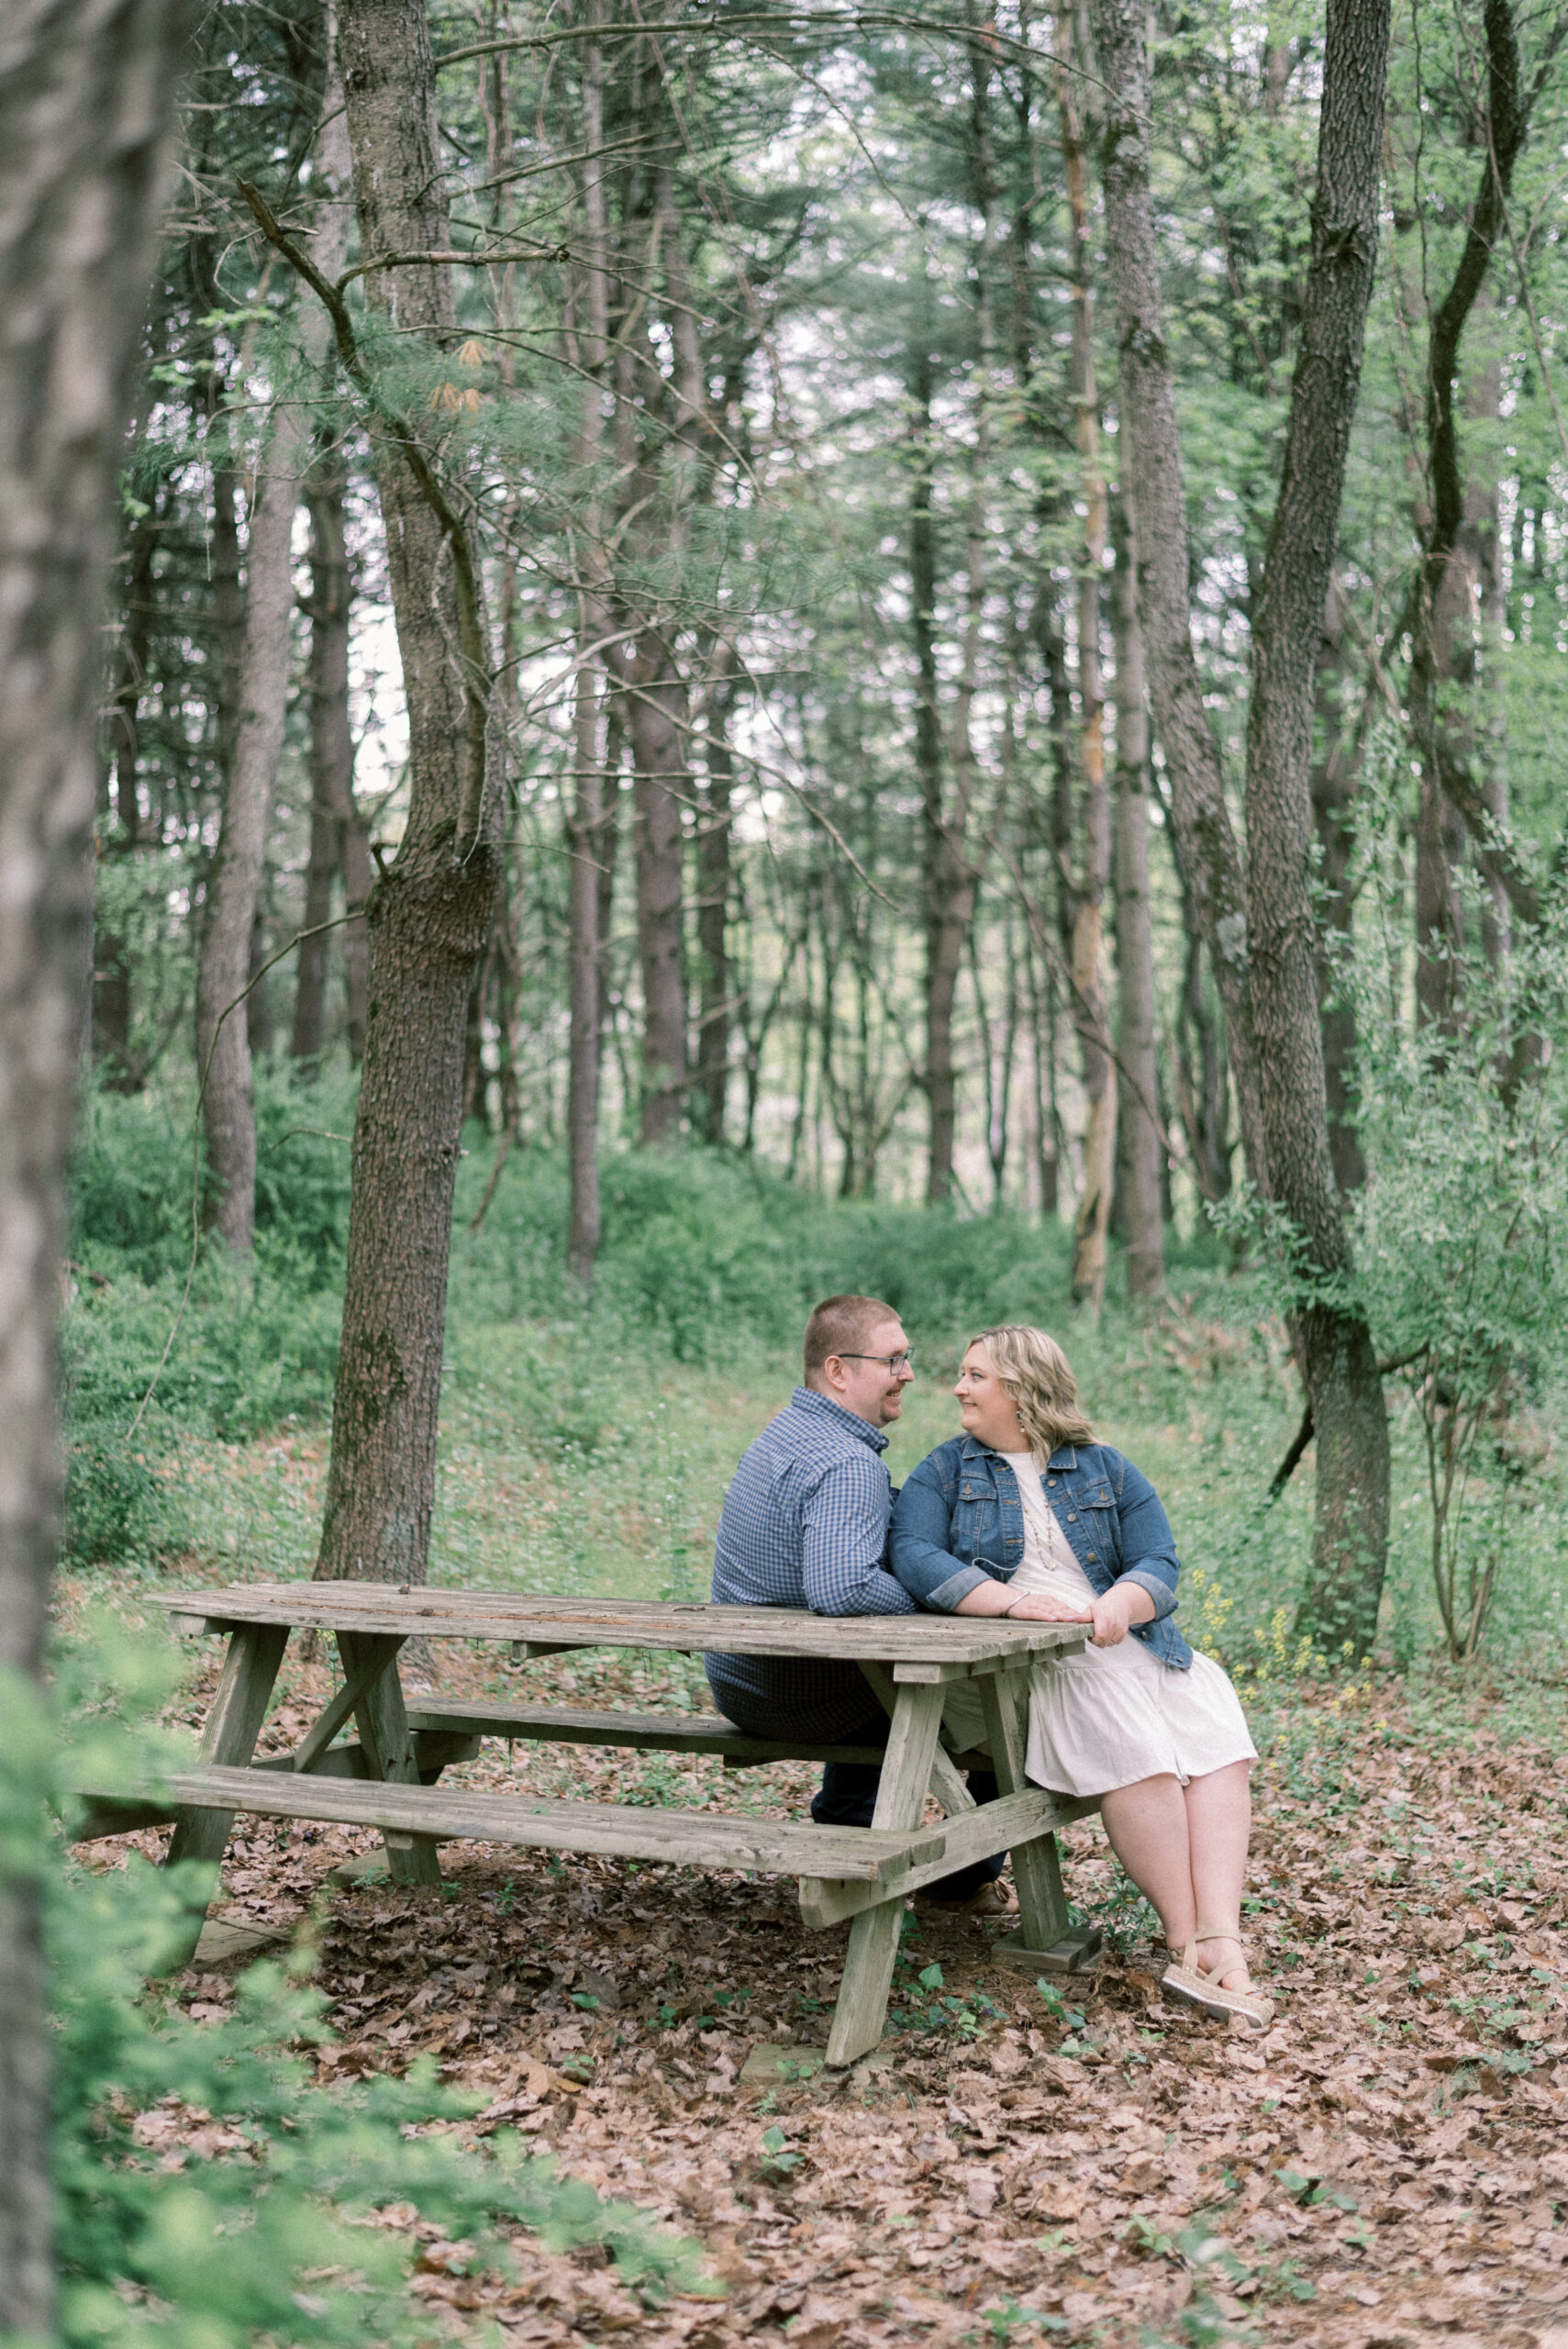 Pennsylvania wedding photographer captures newly engaged couple sitting together at picnic table